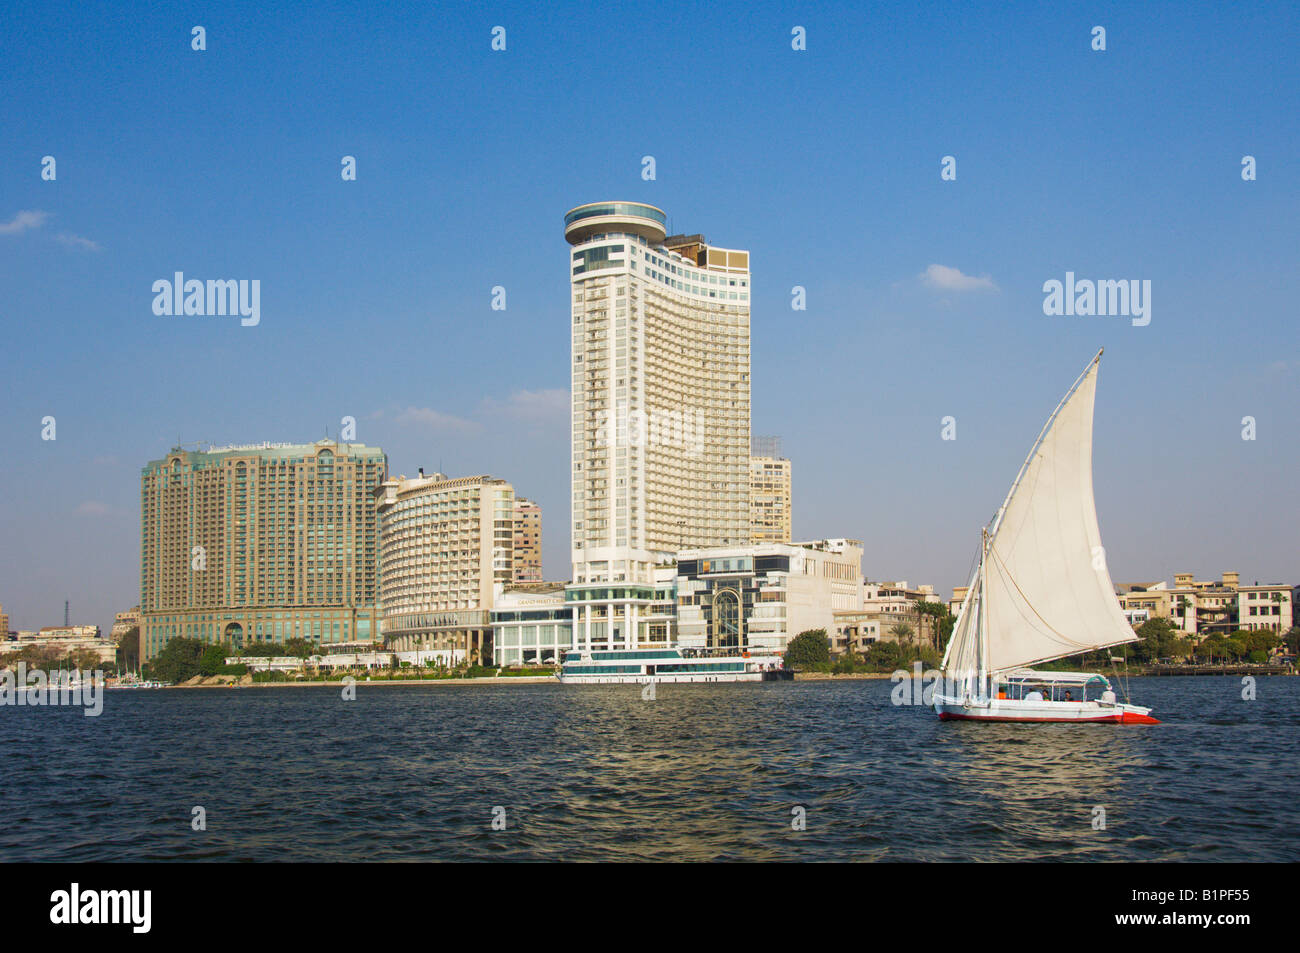 The Four Seasons and the Grand Hyatt Hotels in Cairo with a felucca sailboat on the Nile river Egypt Stock Photo